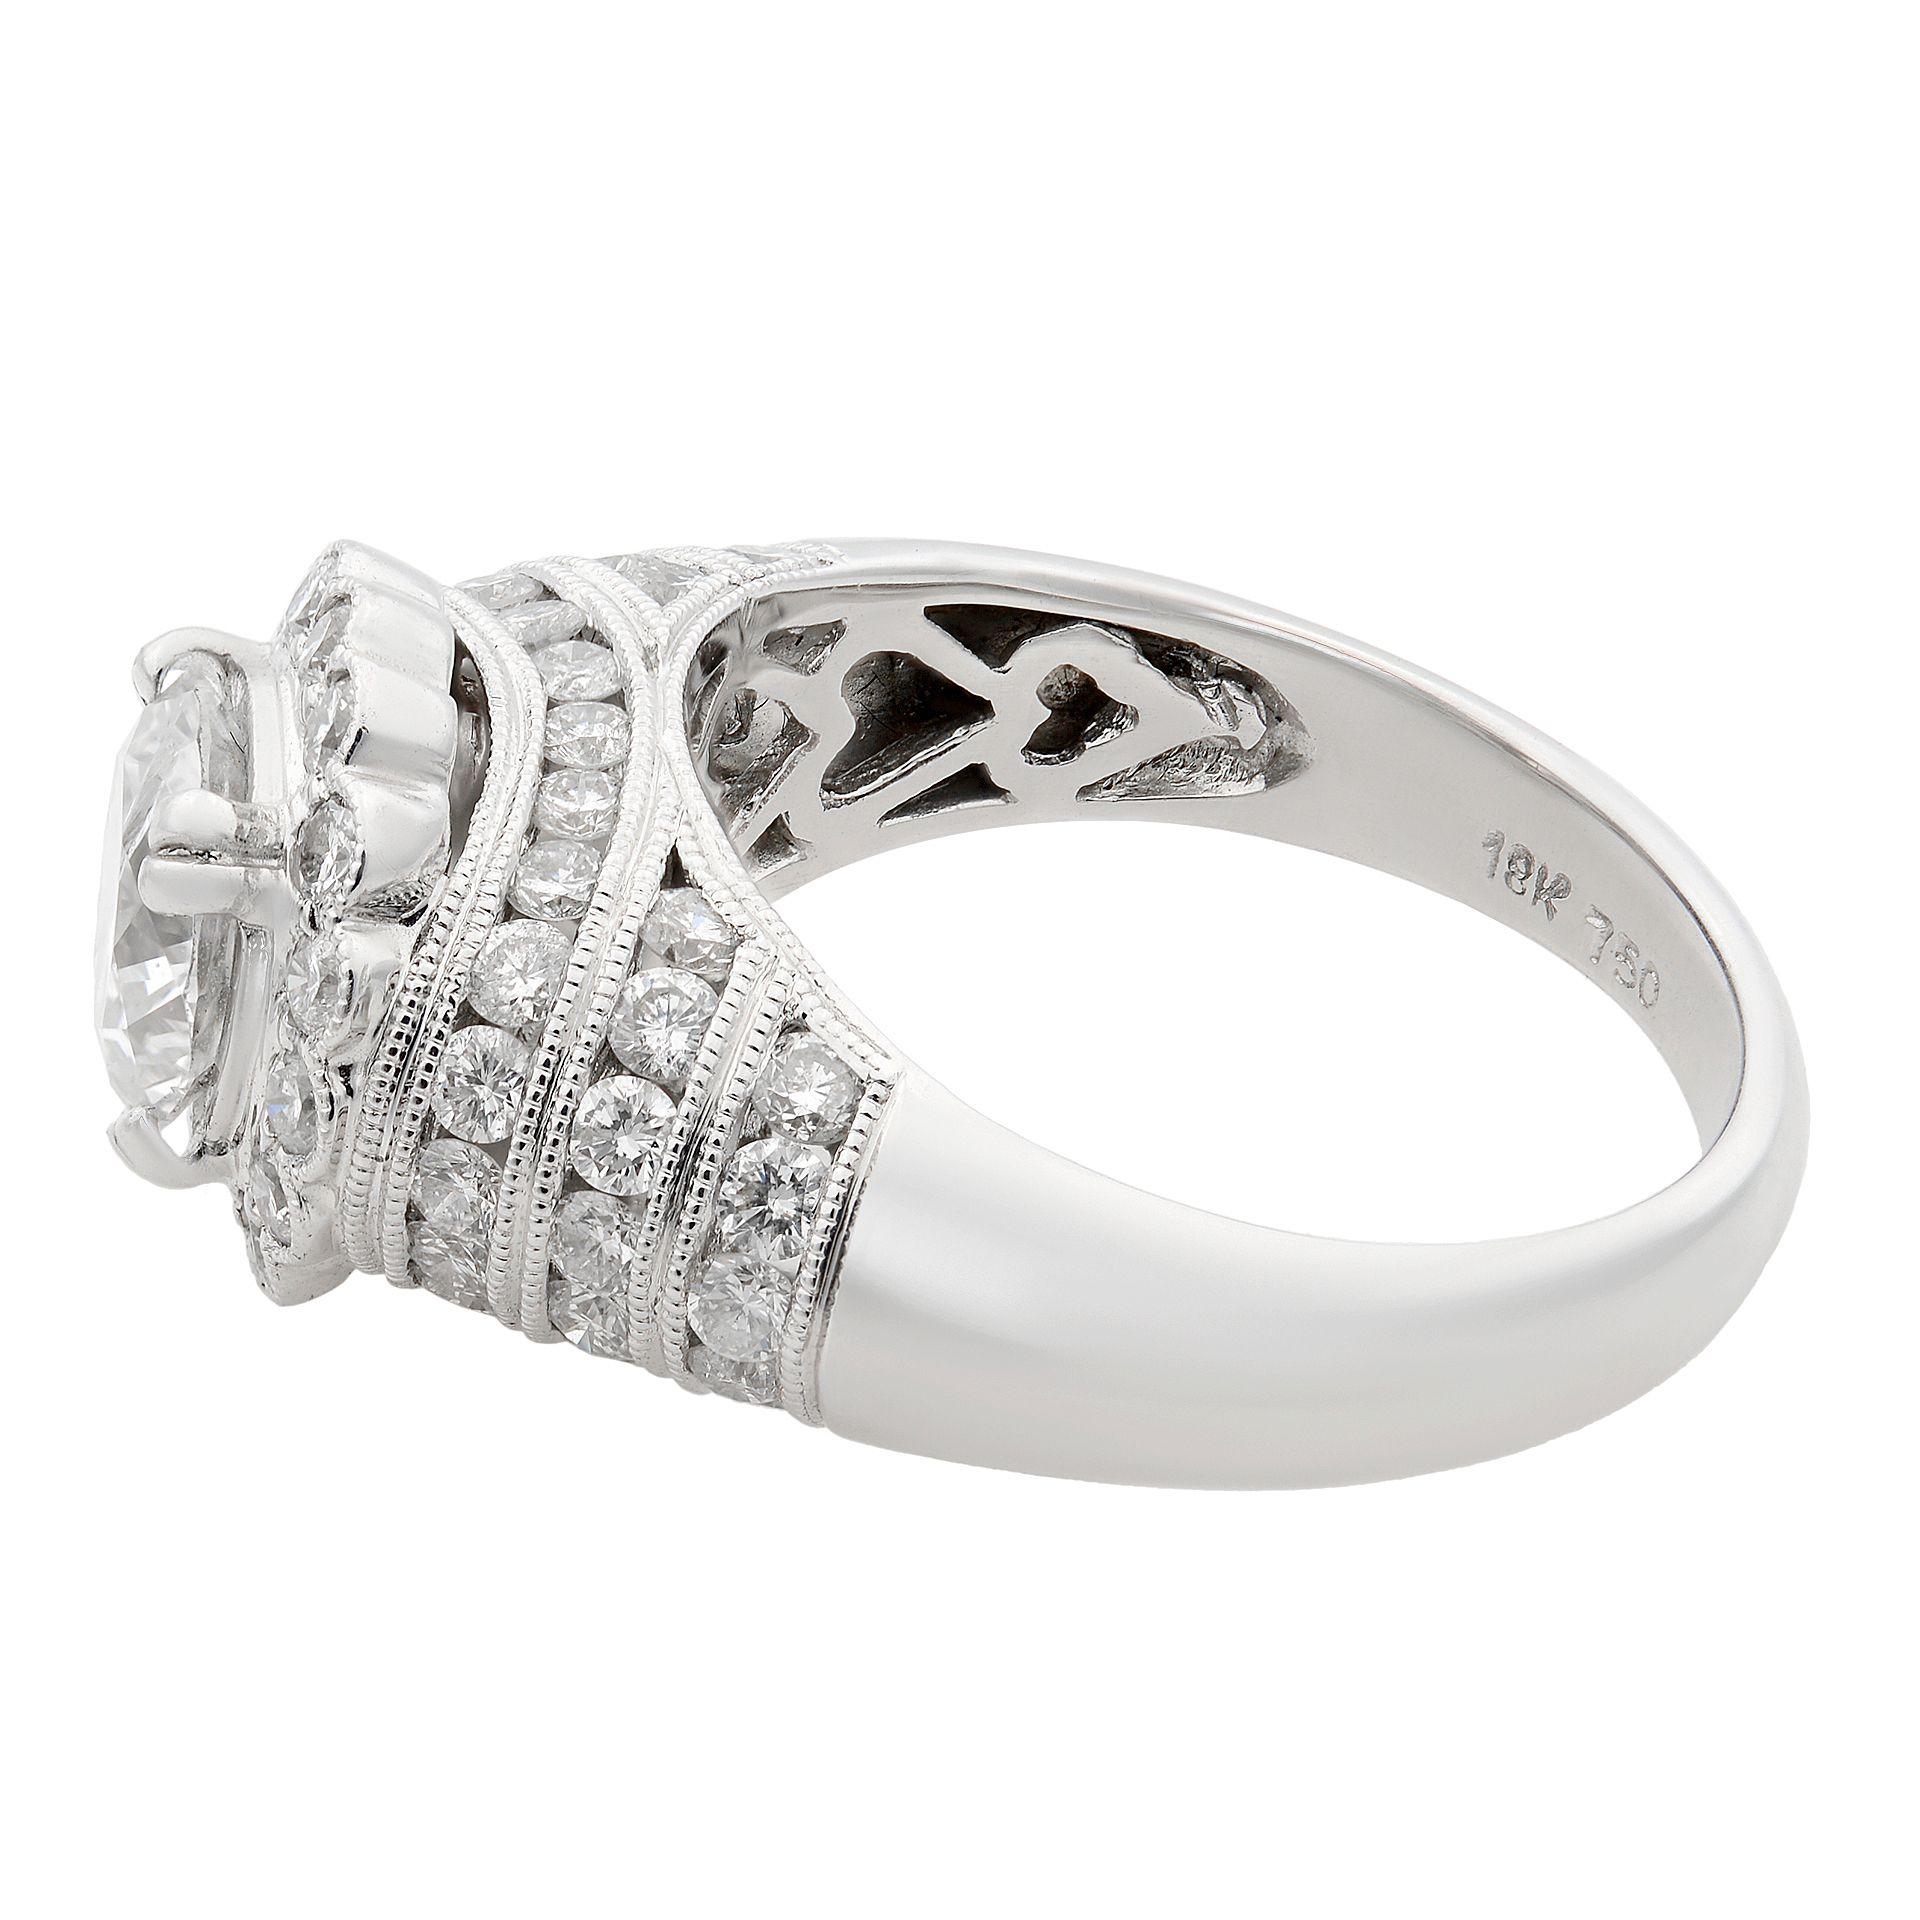 This gorgeous engagement ring is set with 1.26ct round cut center stone with a halo and a channel set diamonds around on a thick shank. Very elegant looking ring and beautifully shining stones. Total carat weight 2.73ct. Diamonds are aprox. VS2